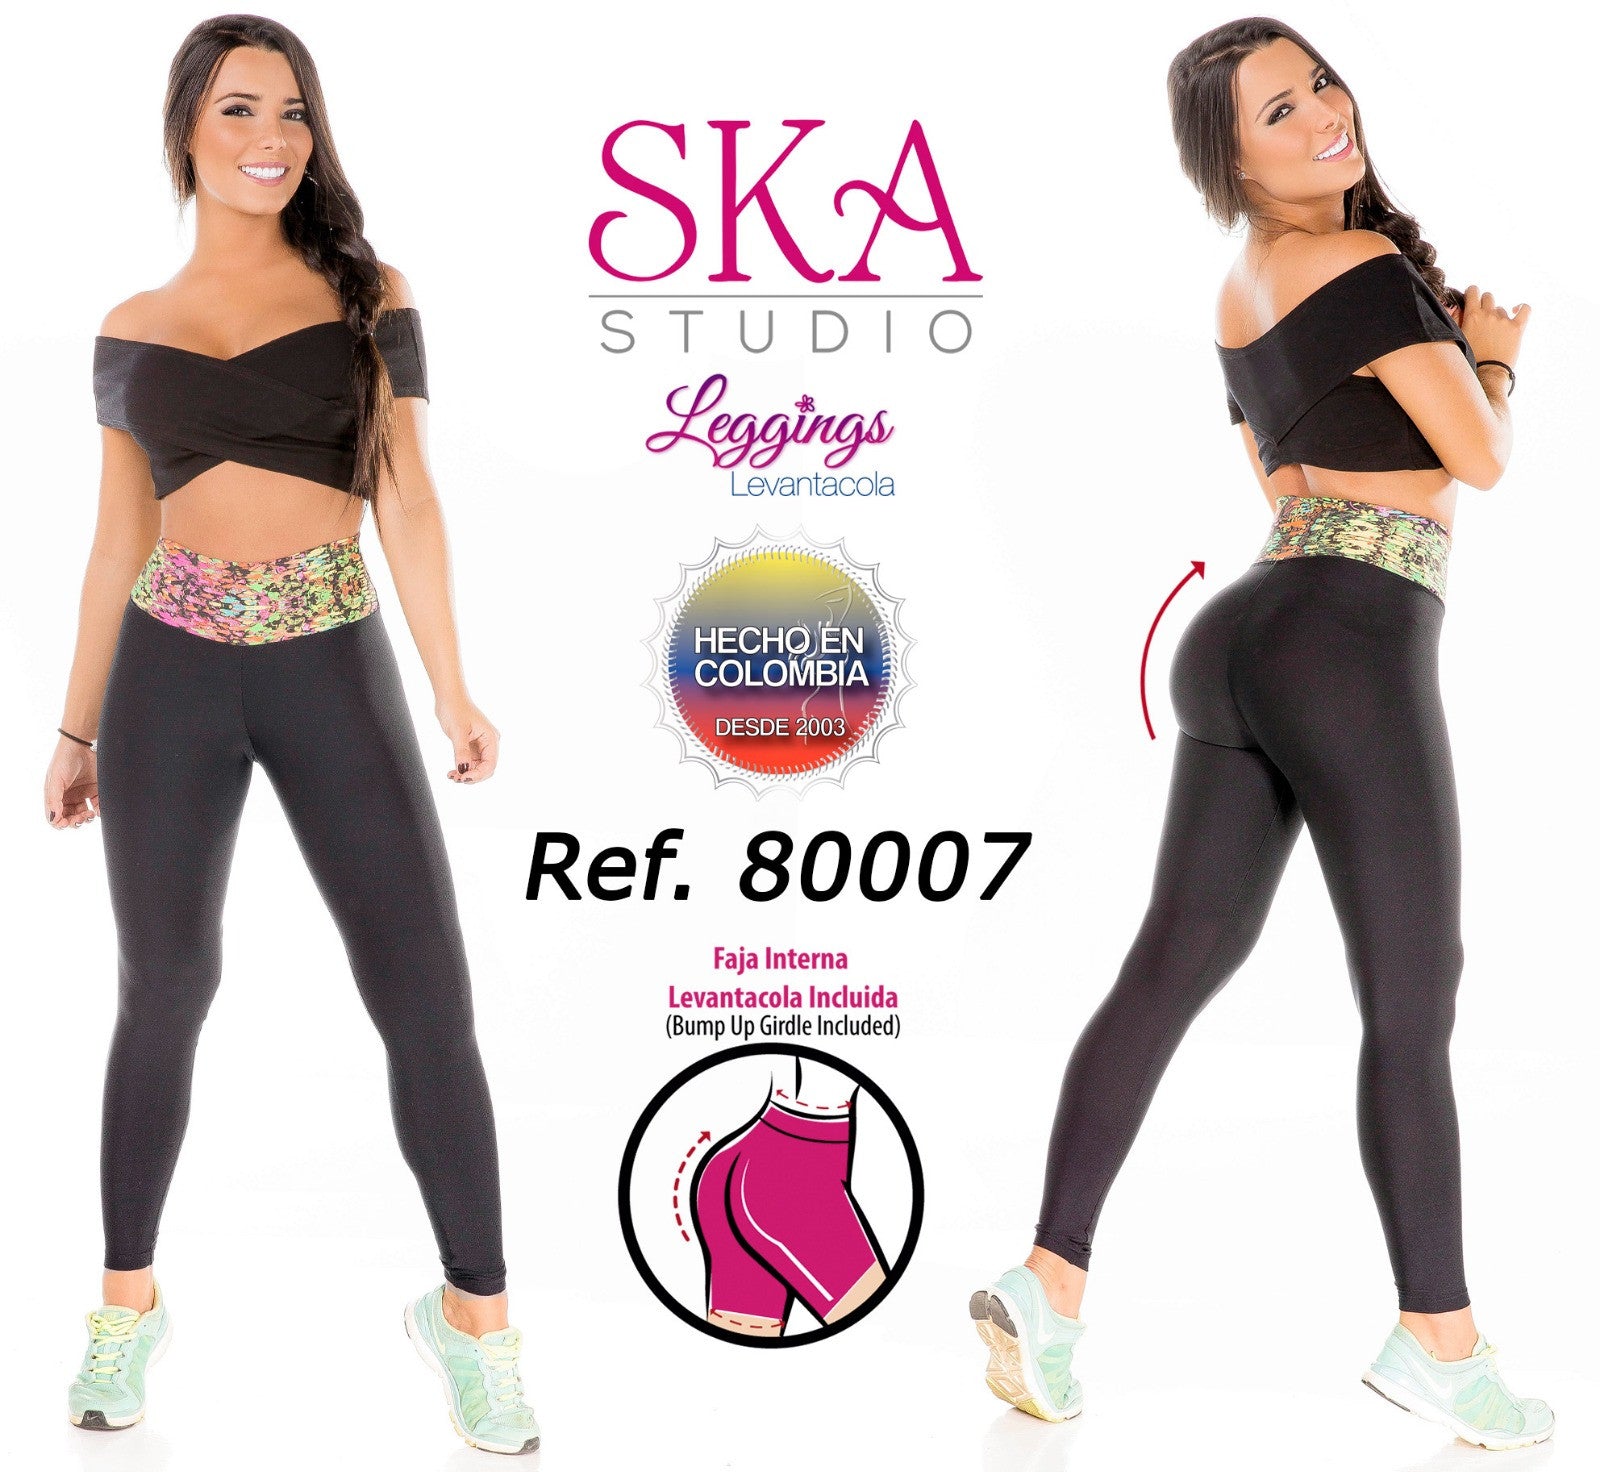 Ska Studio Active wear Now Available